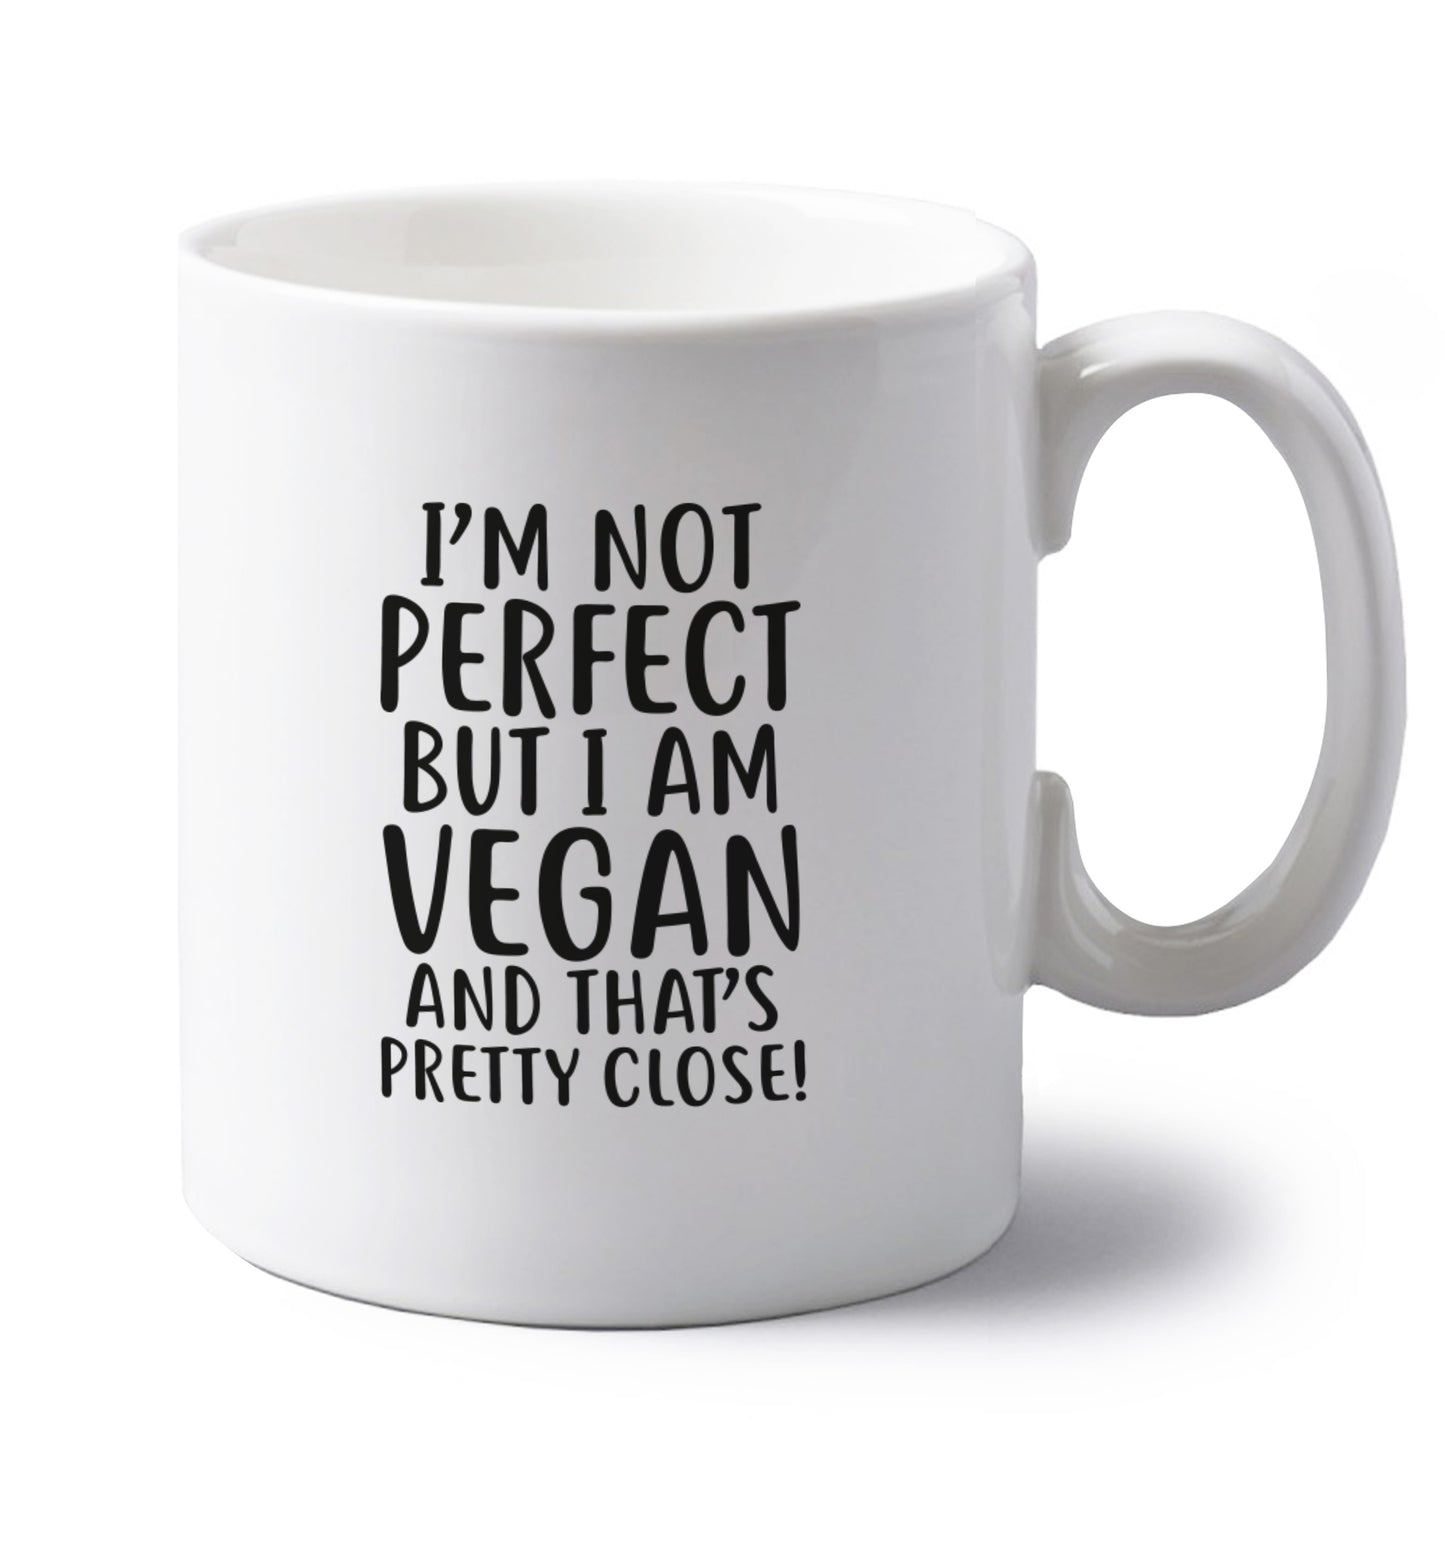 Might not be perfect but I am vegan left handed white ceramic mug 